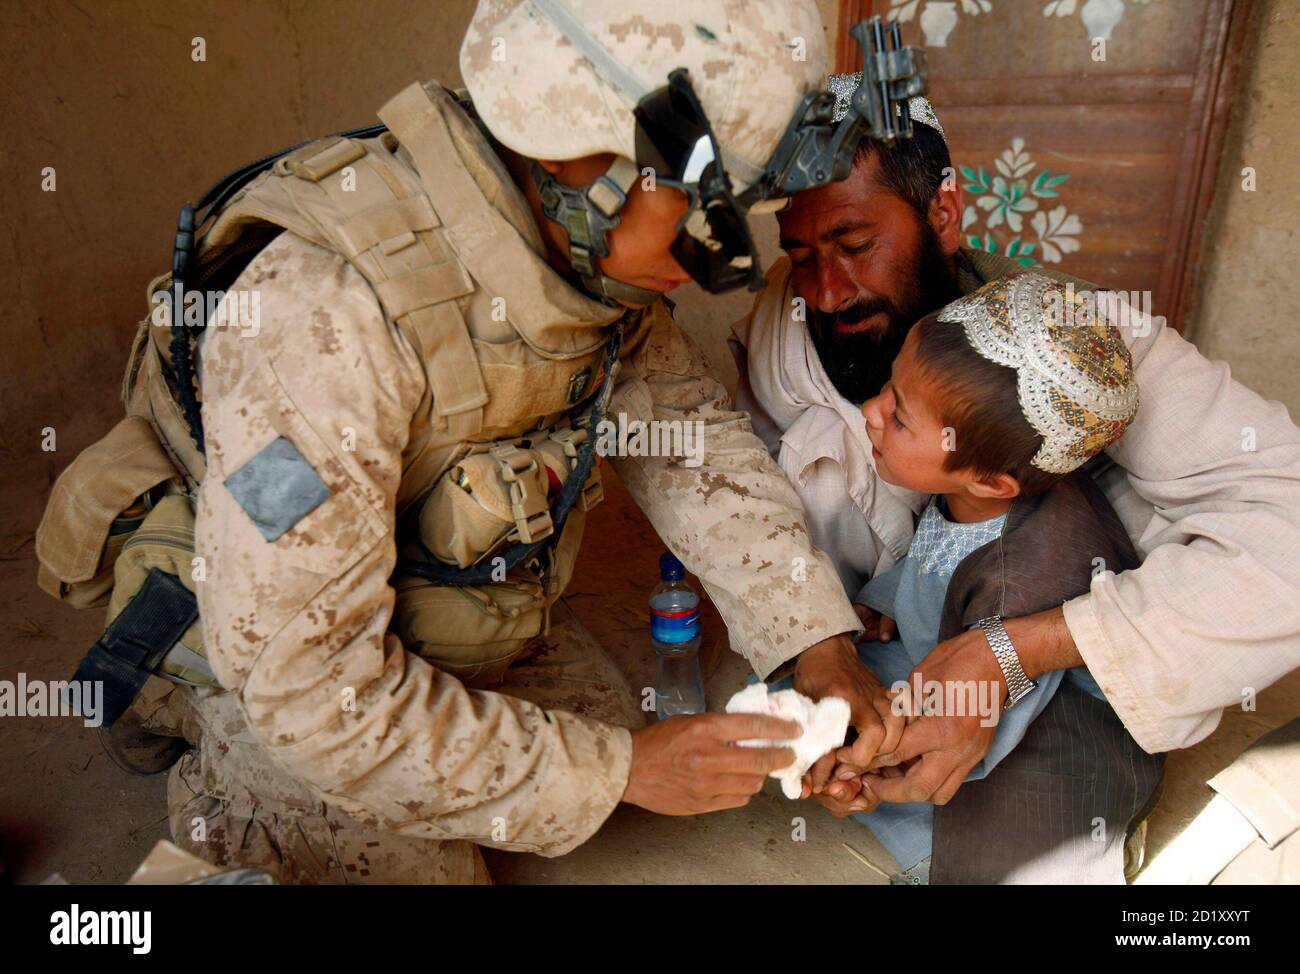 A U.S. Marine from Lima company 3rd Battalion 6th Marine Regiment administers first aid to a child during a patrol in Karez-e-Sayyidi, in Helmand province, April 5, 2010. REUTERS/Asmaa Waguih  (AFGHANISTAN - Tags: CIVIL UNREST MILITARY CONFLICT) Stock Photo